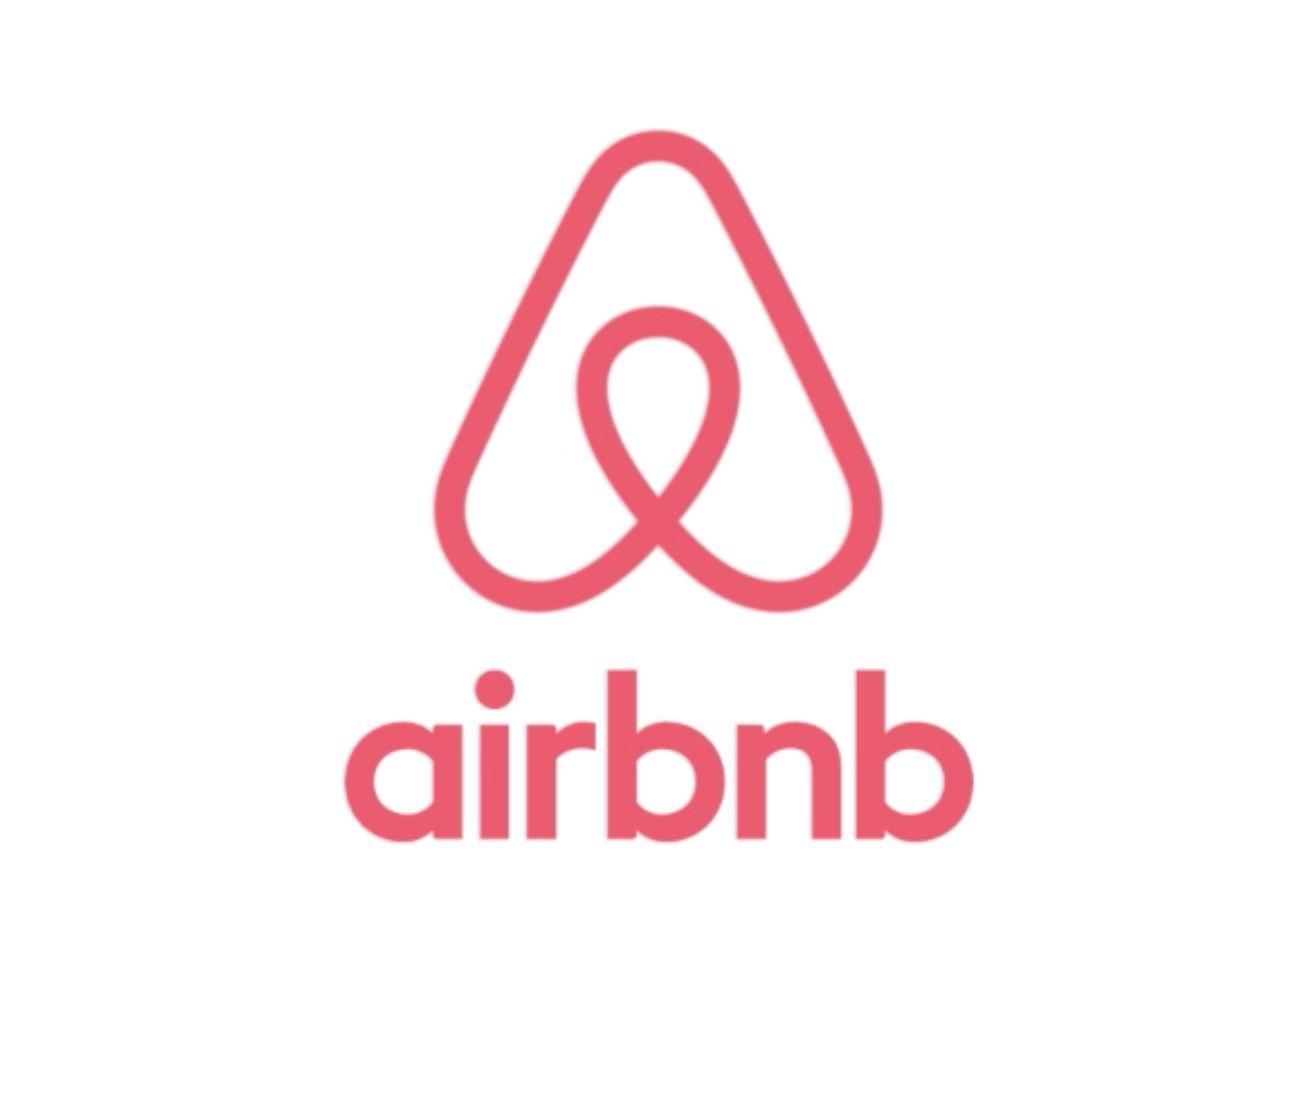 Airbnb New Logo - AirBnB is now a lifestyle brand | TheWebMate